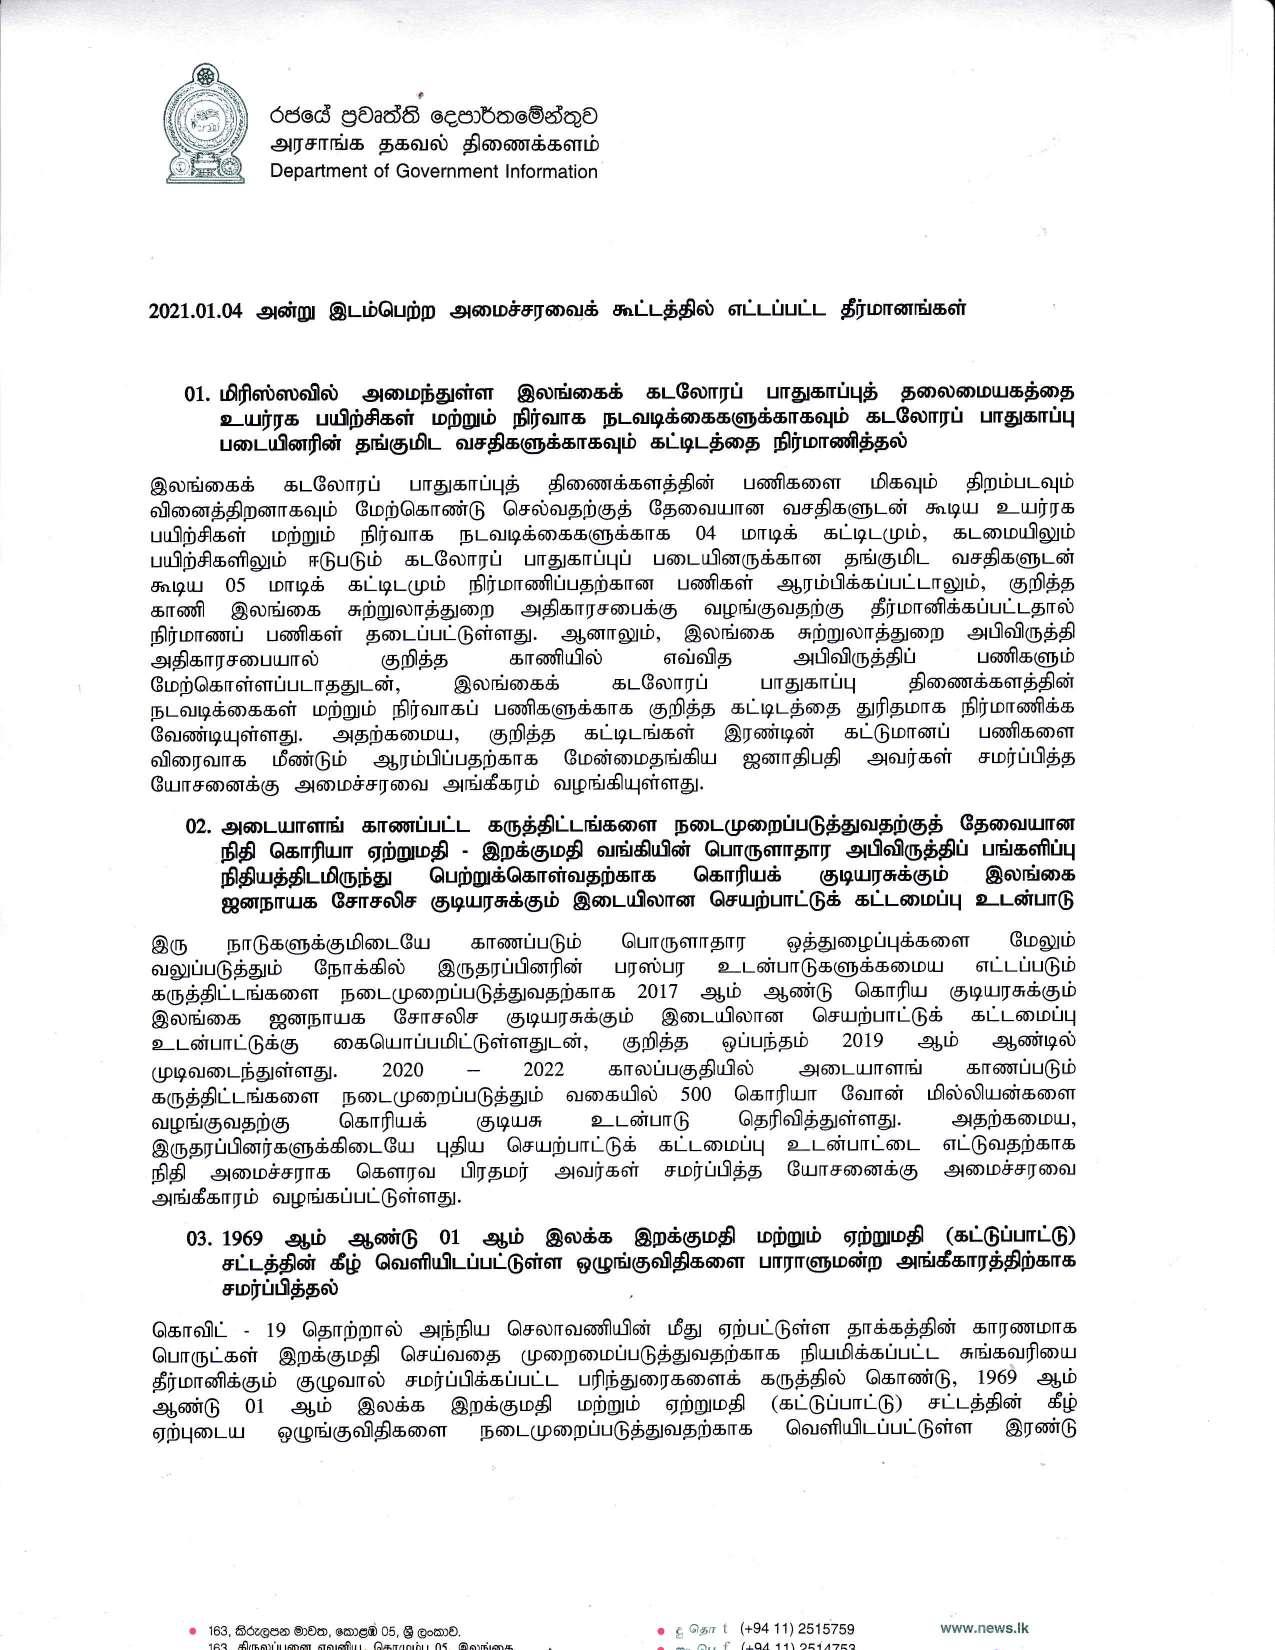 Cabinet Decision on 04.01.2021 Tamil page 001